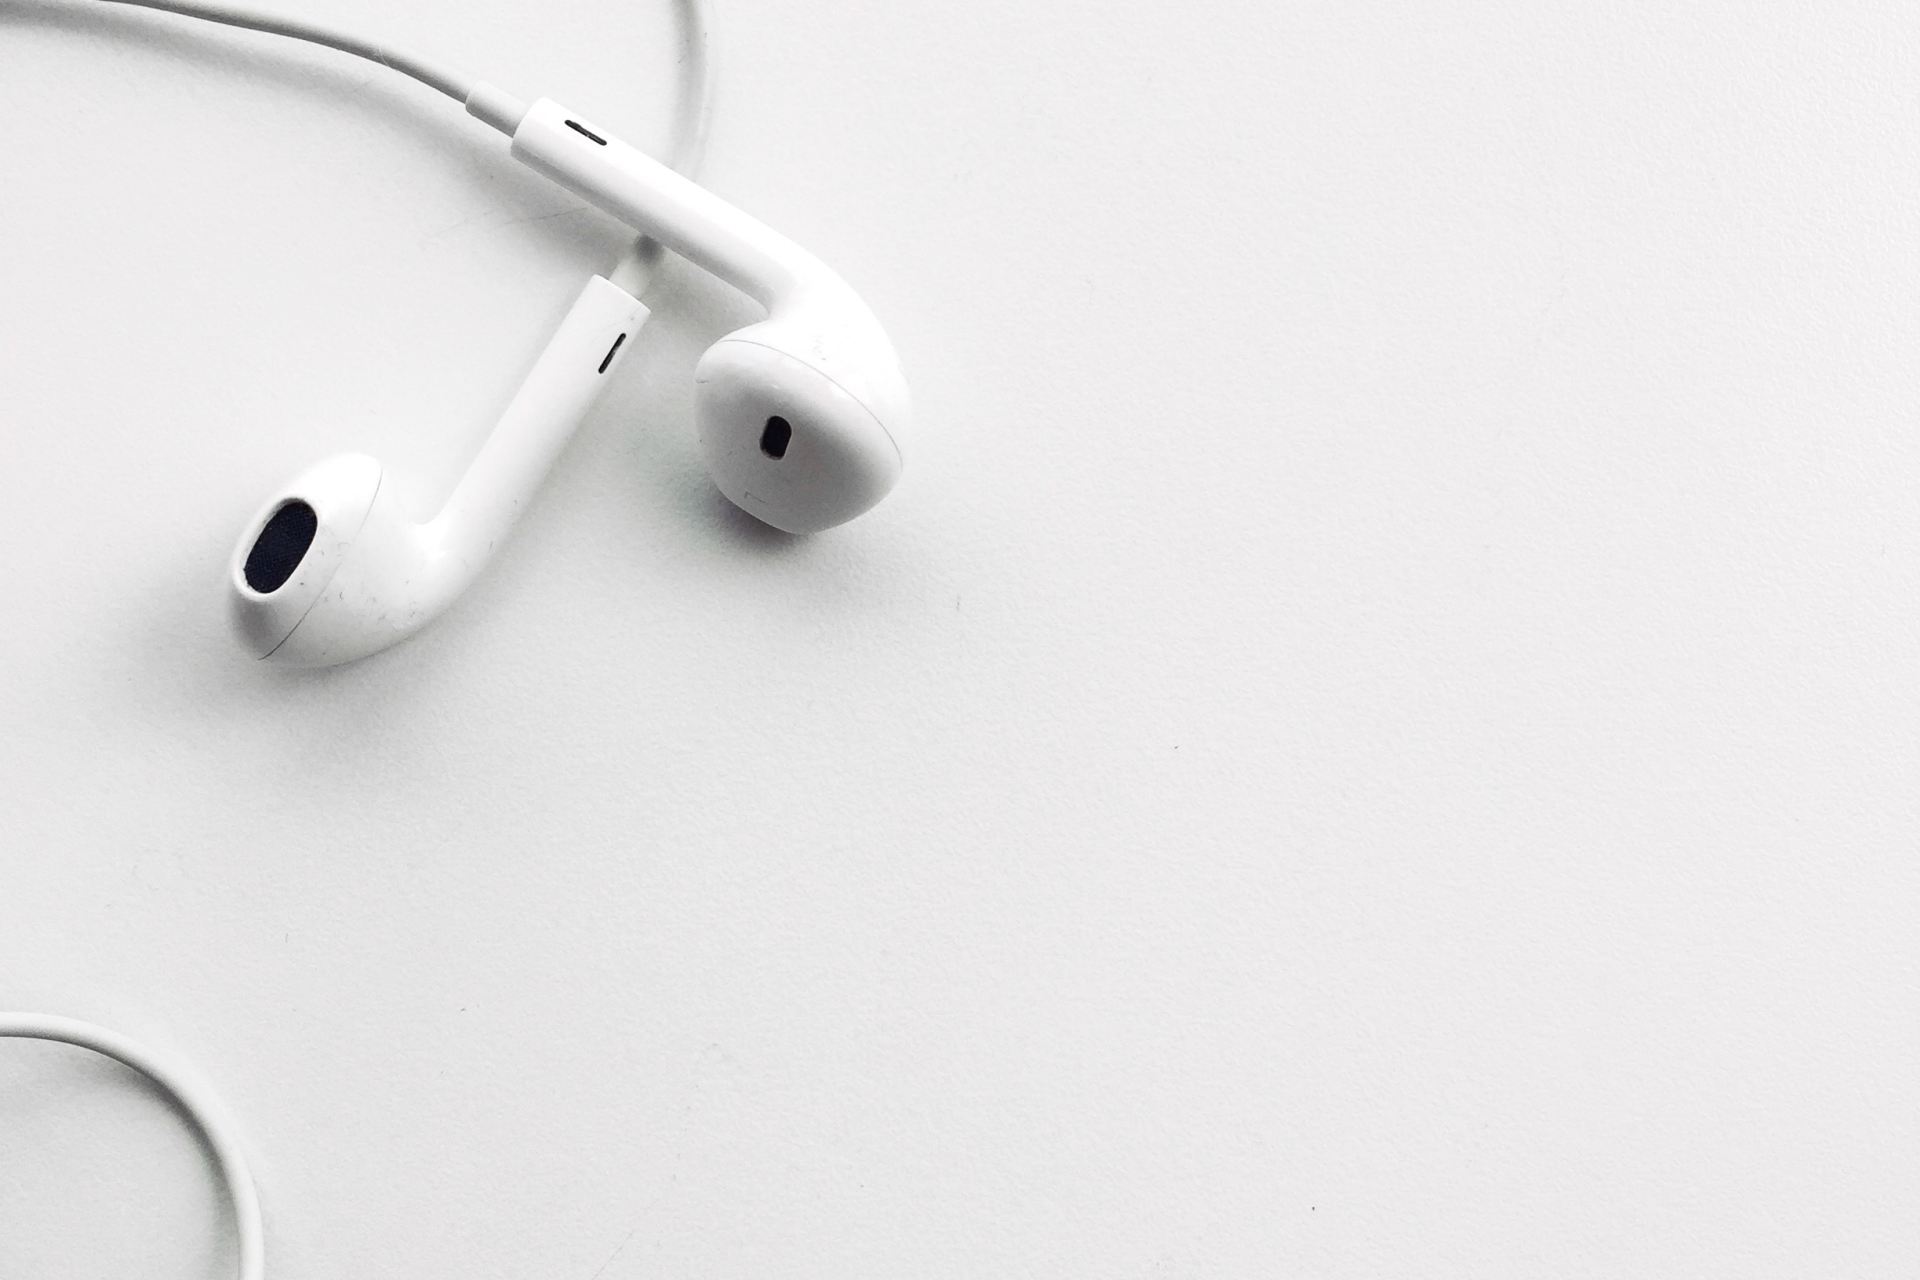 Apple AirPods on white surface